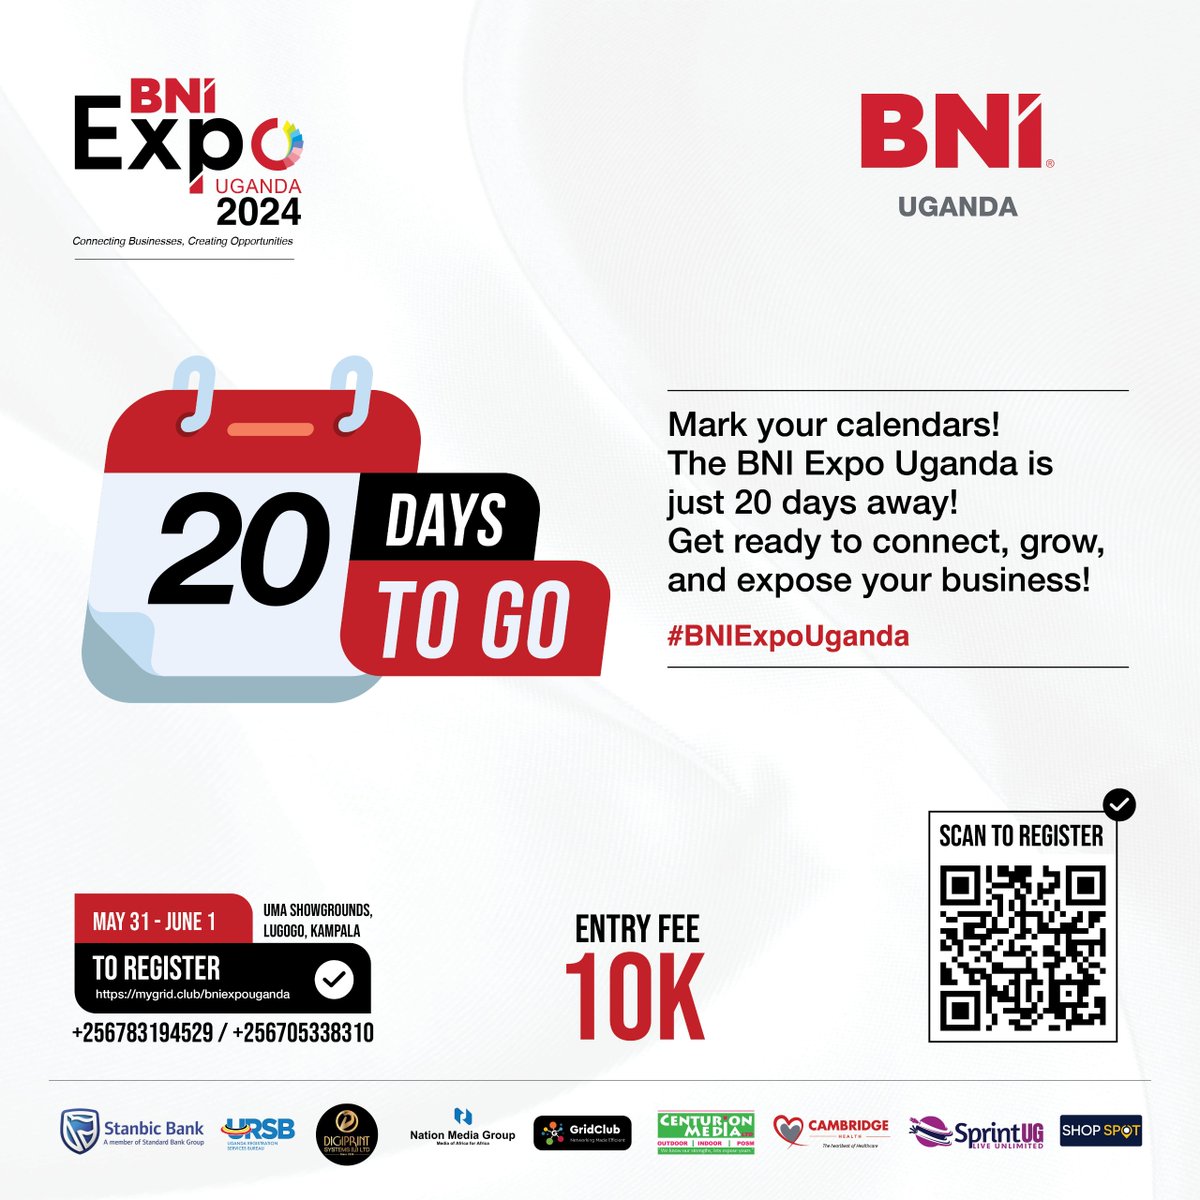 PROMO: The opportunity to network and grow is here!! Book your tickets now for the enriching BNI Expo 2024 on May 31 and June 1, 2024 at UMA Showgrounds Lugogo. Entrance is only Shs10,000 Registration: mygrid.club/bniexpouganda or call 0783194529 or 0705362641 to register for a…